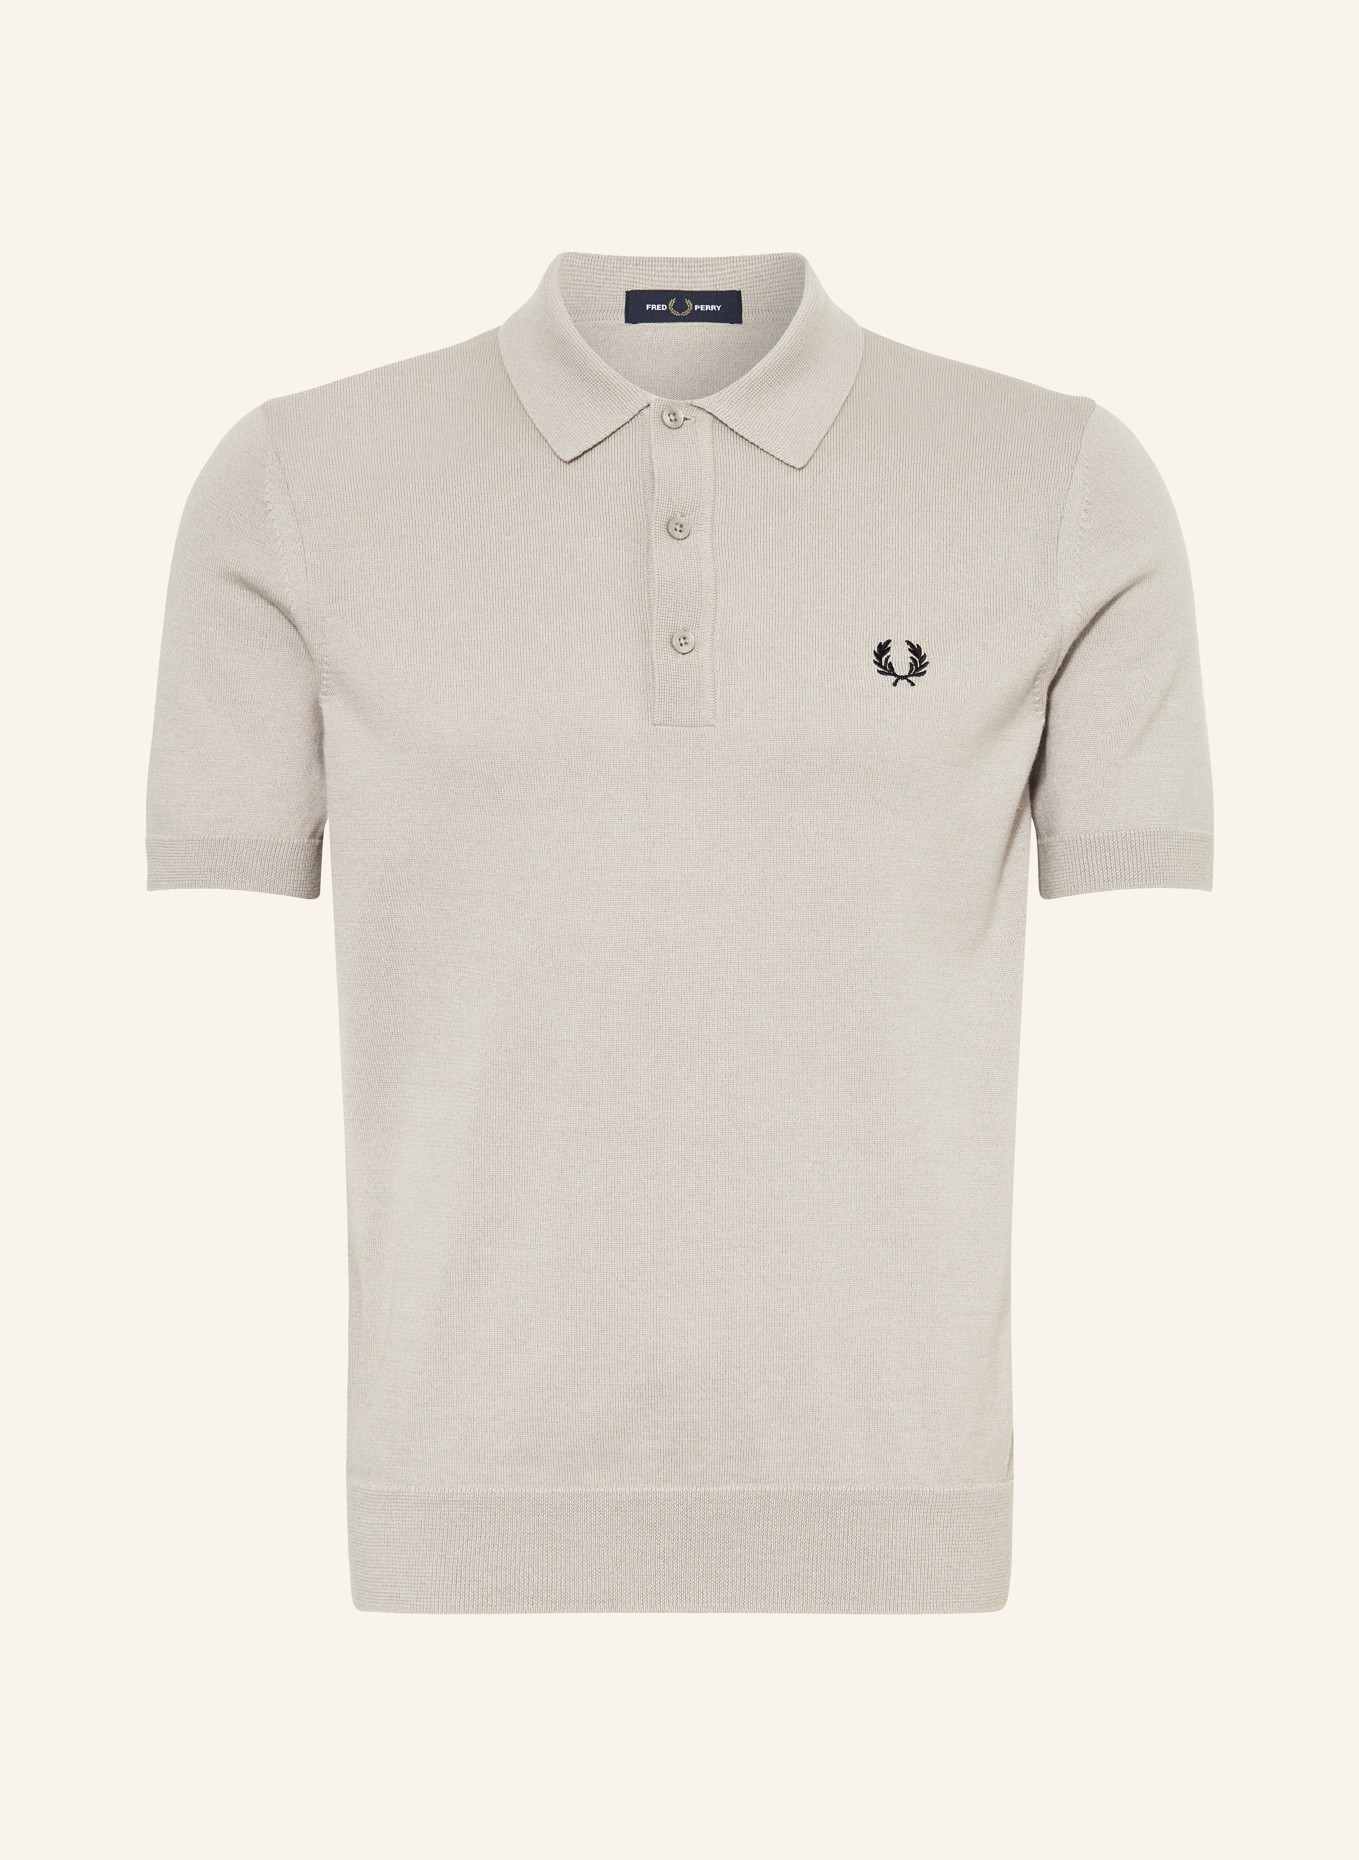 FRED PERRY Strick-Poloshirt, Farbe: TAUPE (Bild 1)